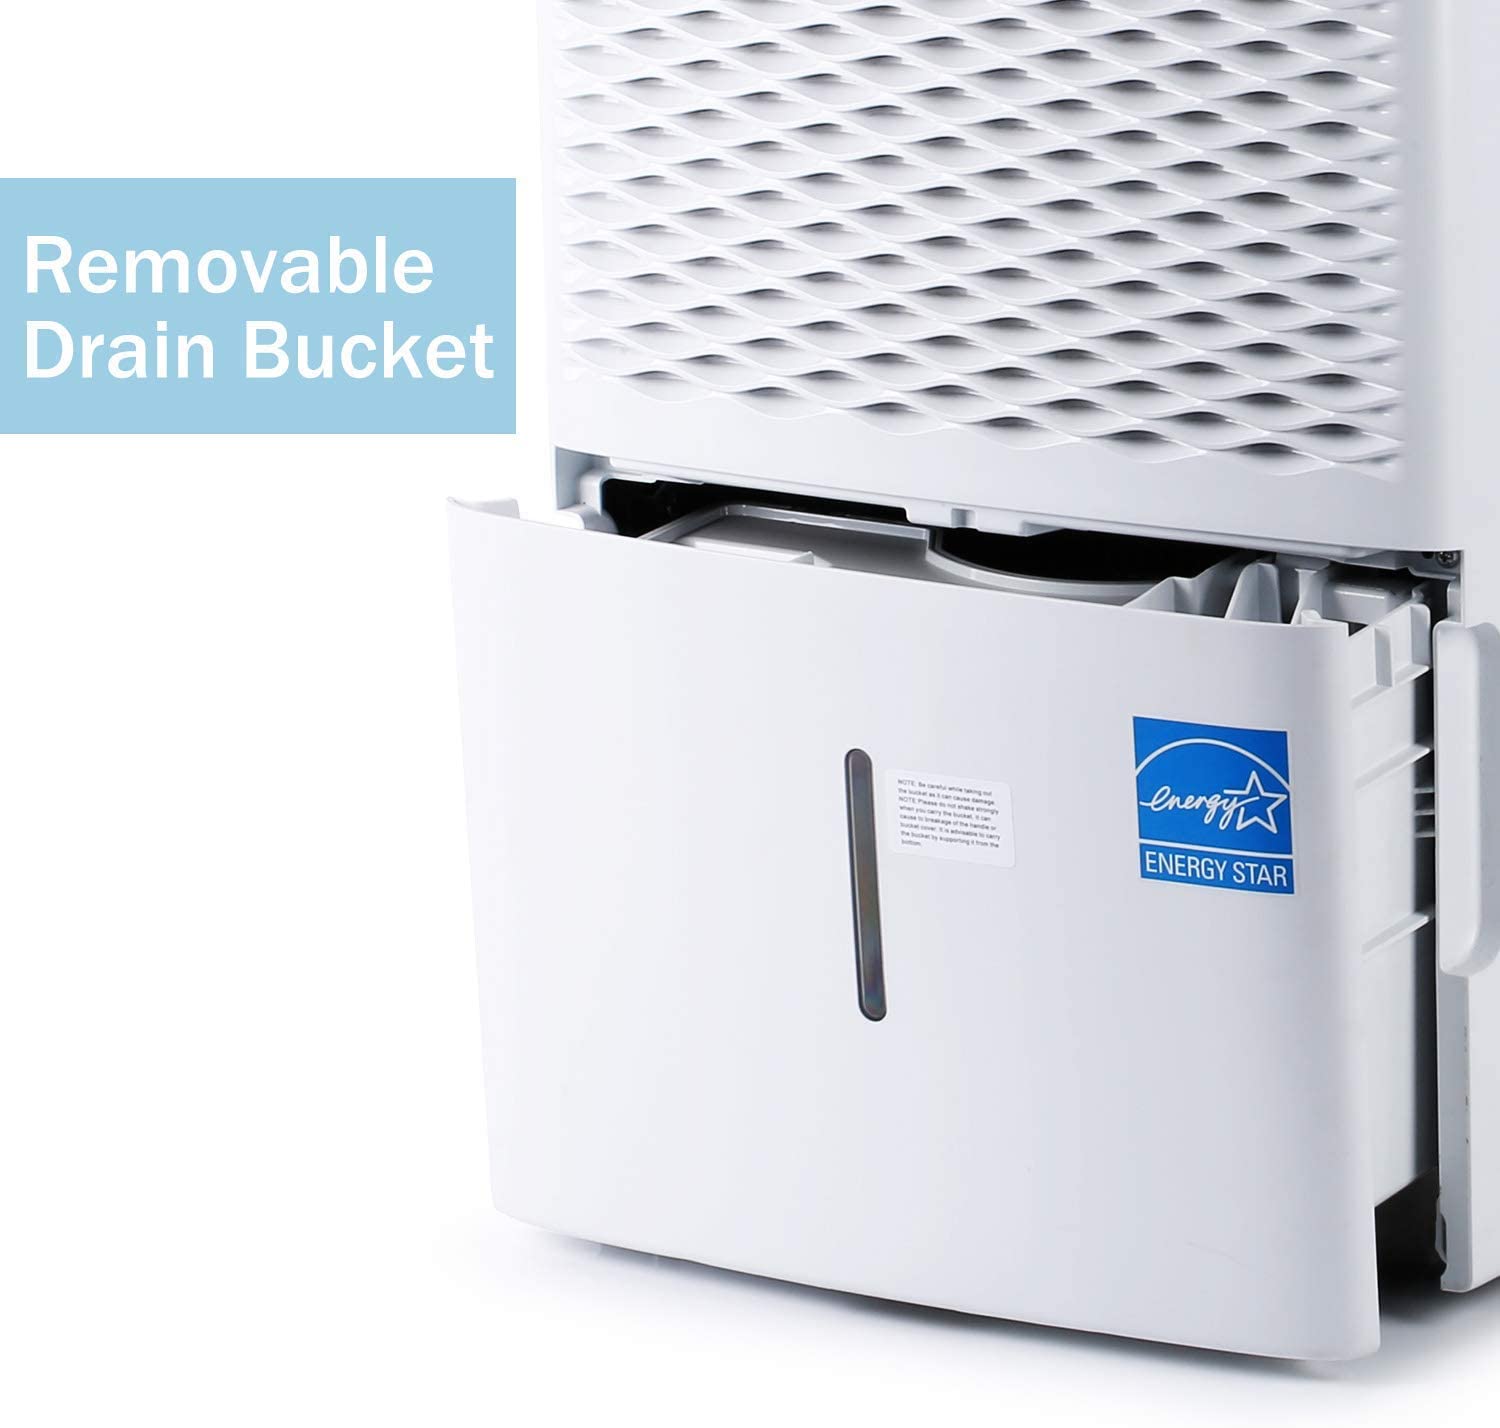 613nno v8oL. AC SL1500 10 BEST DEHUMIDIFIER WITH PUMP 2021 REVIEW AUTO-DRAIN